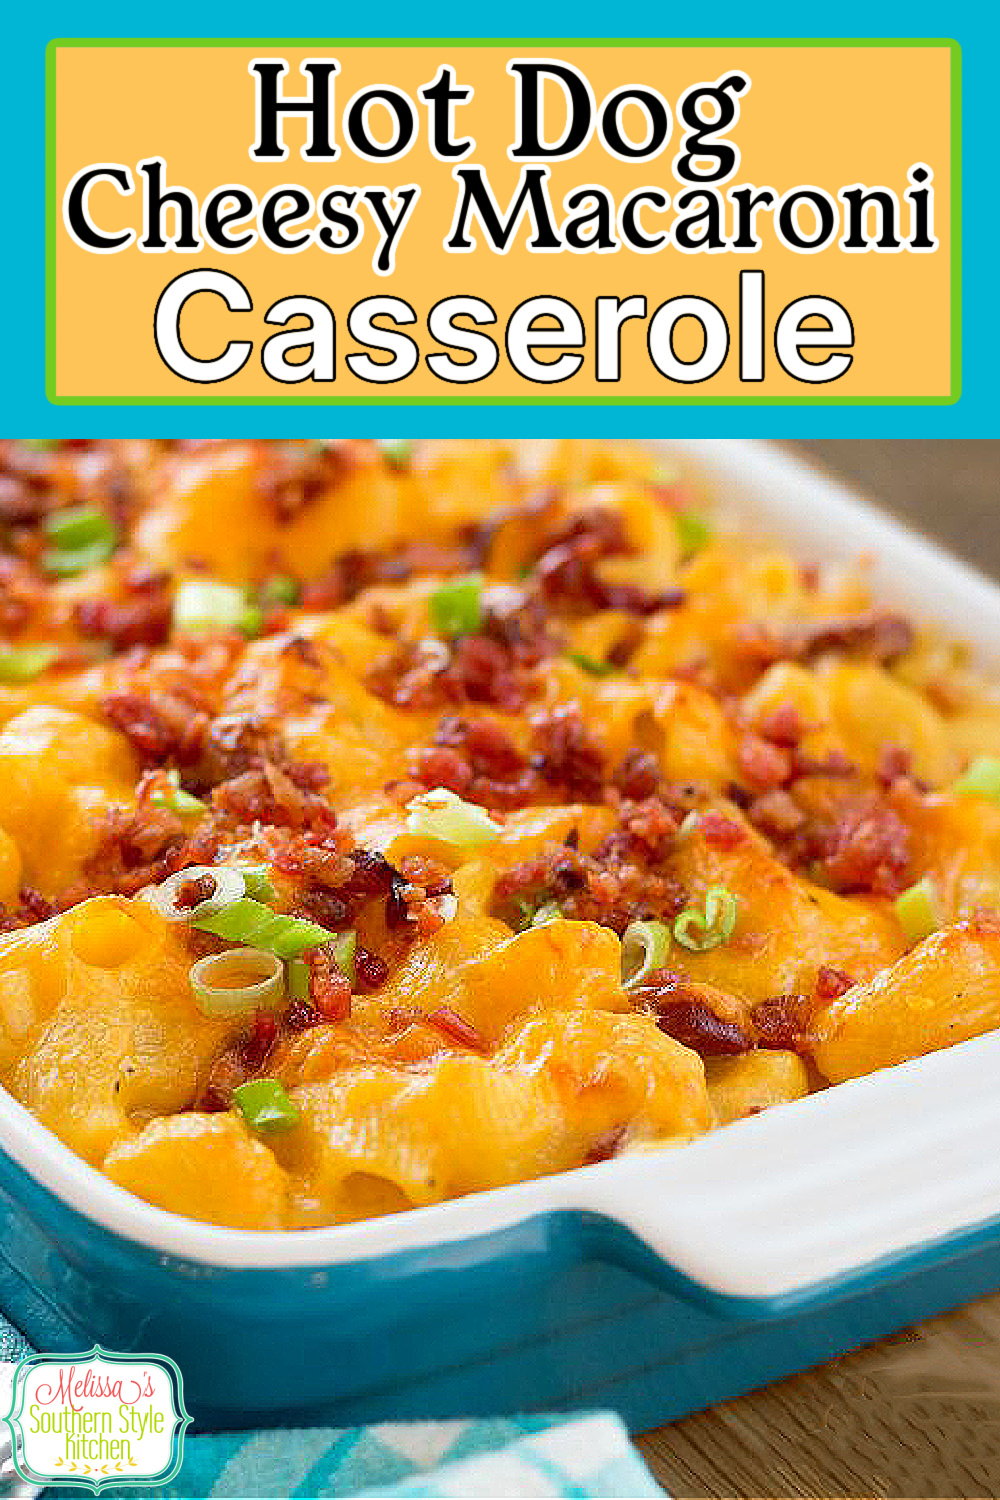 Kids of all ages LOVE this down home Hot Dog Cheesy Macaroni Casserole #hotdogs #macaroniandcheese #hotdogmacaroni #hotdogcasserole #casseroles #dinnerideas #dinner #cheese #macaroni #pasta #casserolerecipes #southernfood #southernrecipes via @melissasssk